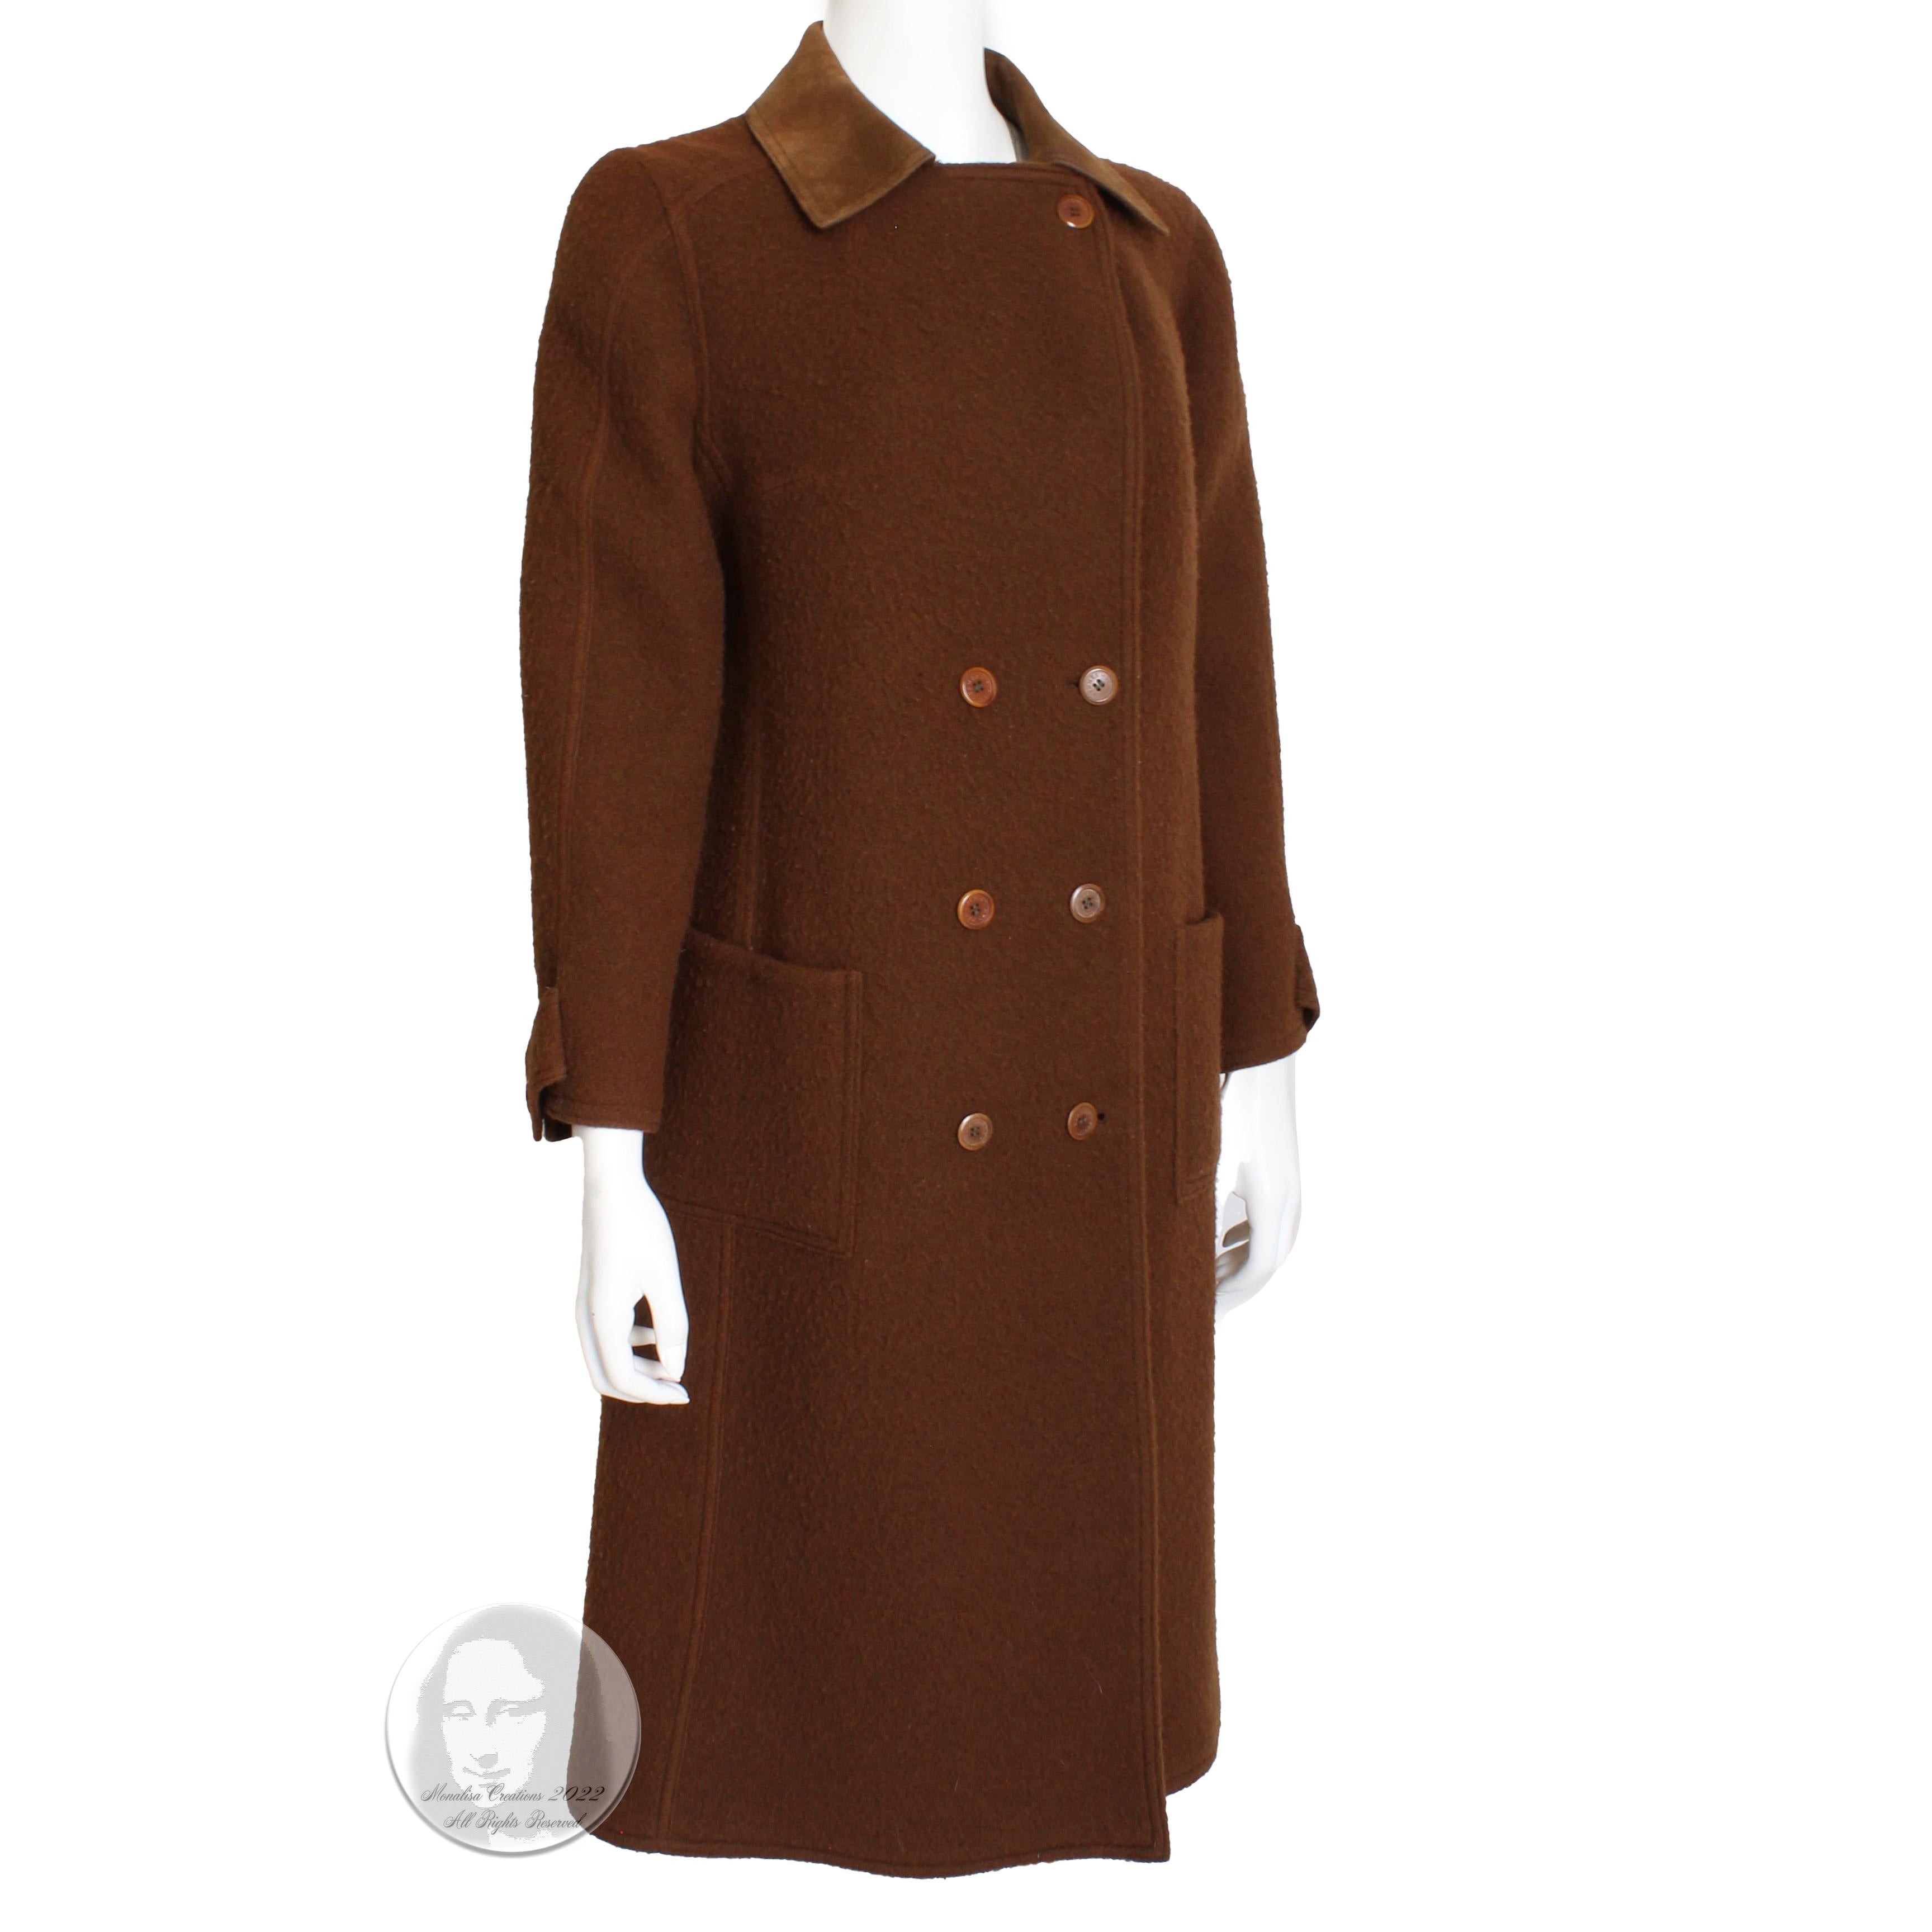 Hermes Brown Double Breasted Suede Leather Trim Trench Style Wool Coat, 1970s For Sale 2